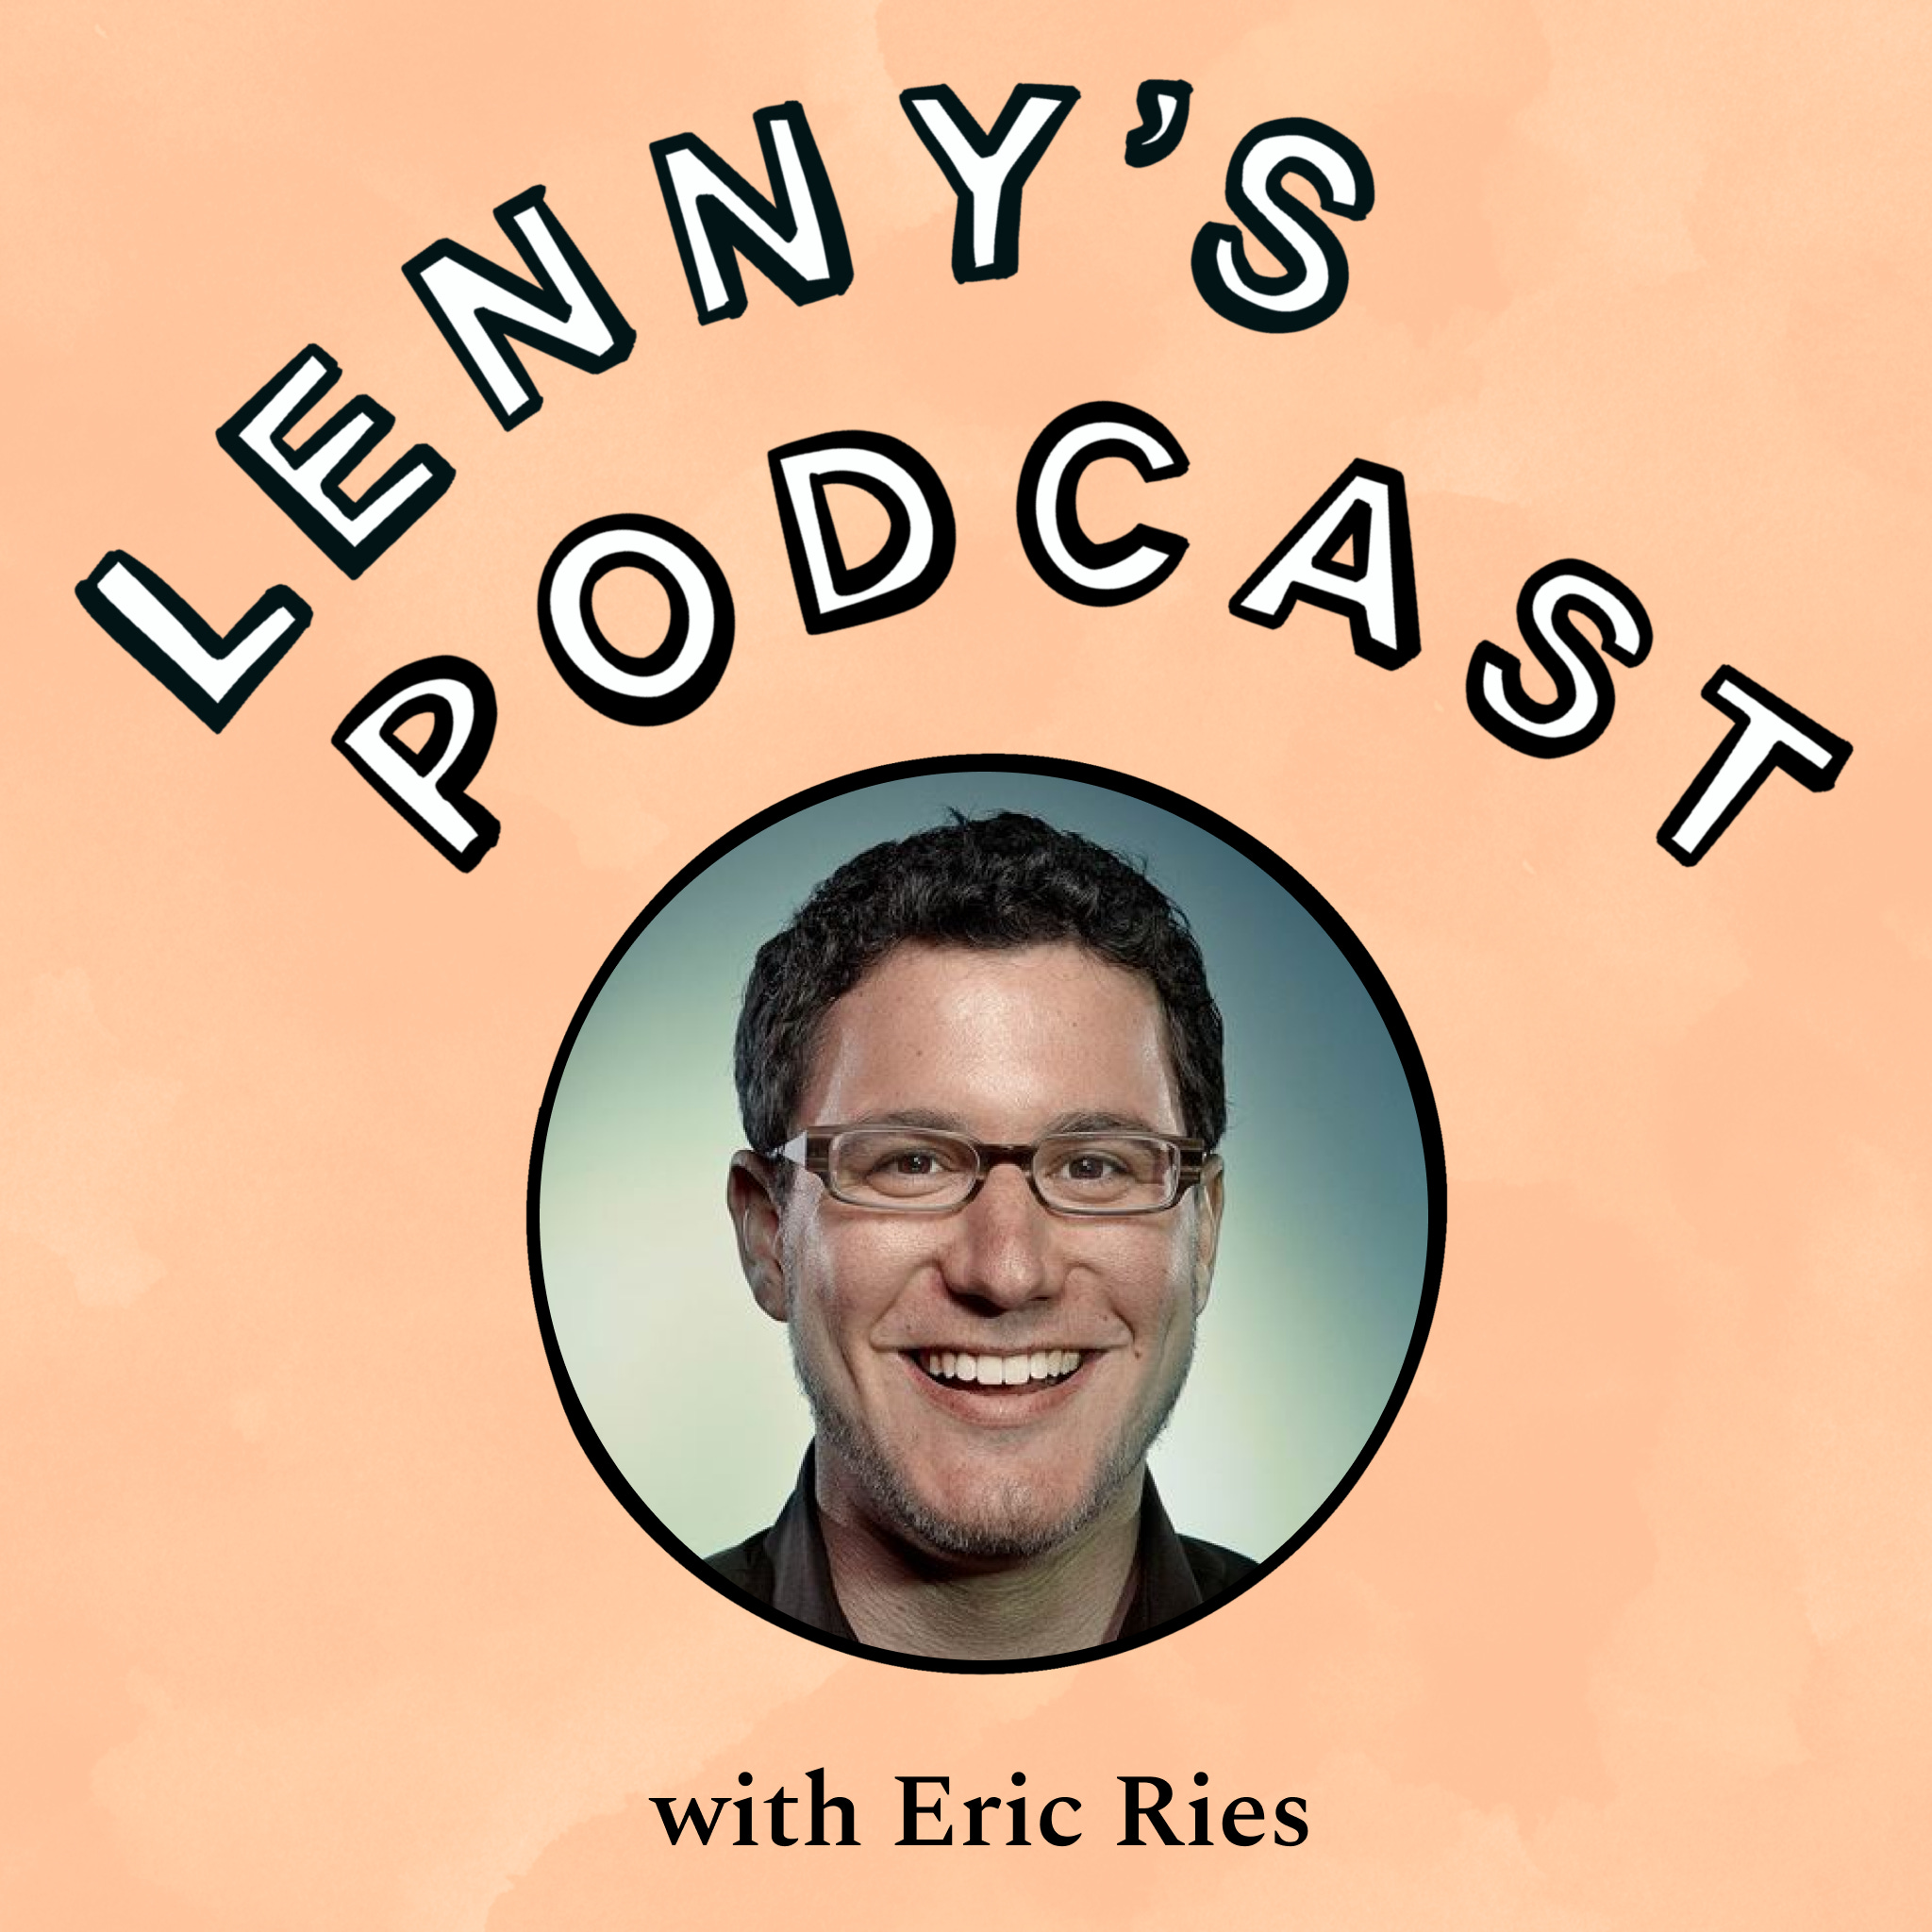 Reflections on a movement | Eric Ries (creator of the Lean Startup methodology)